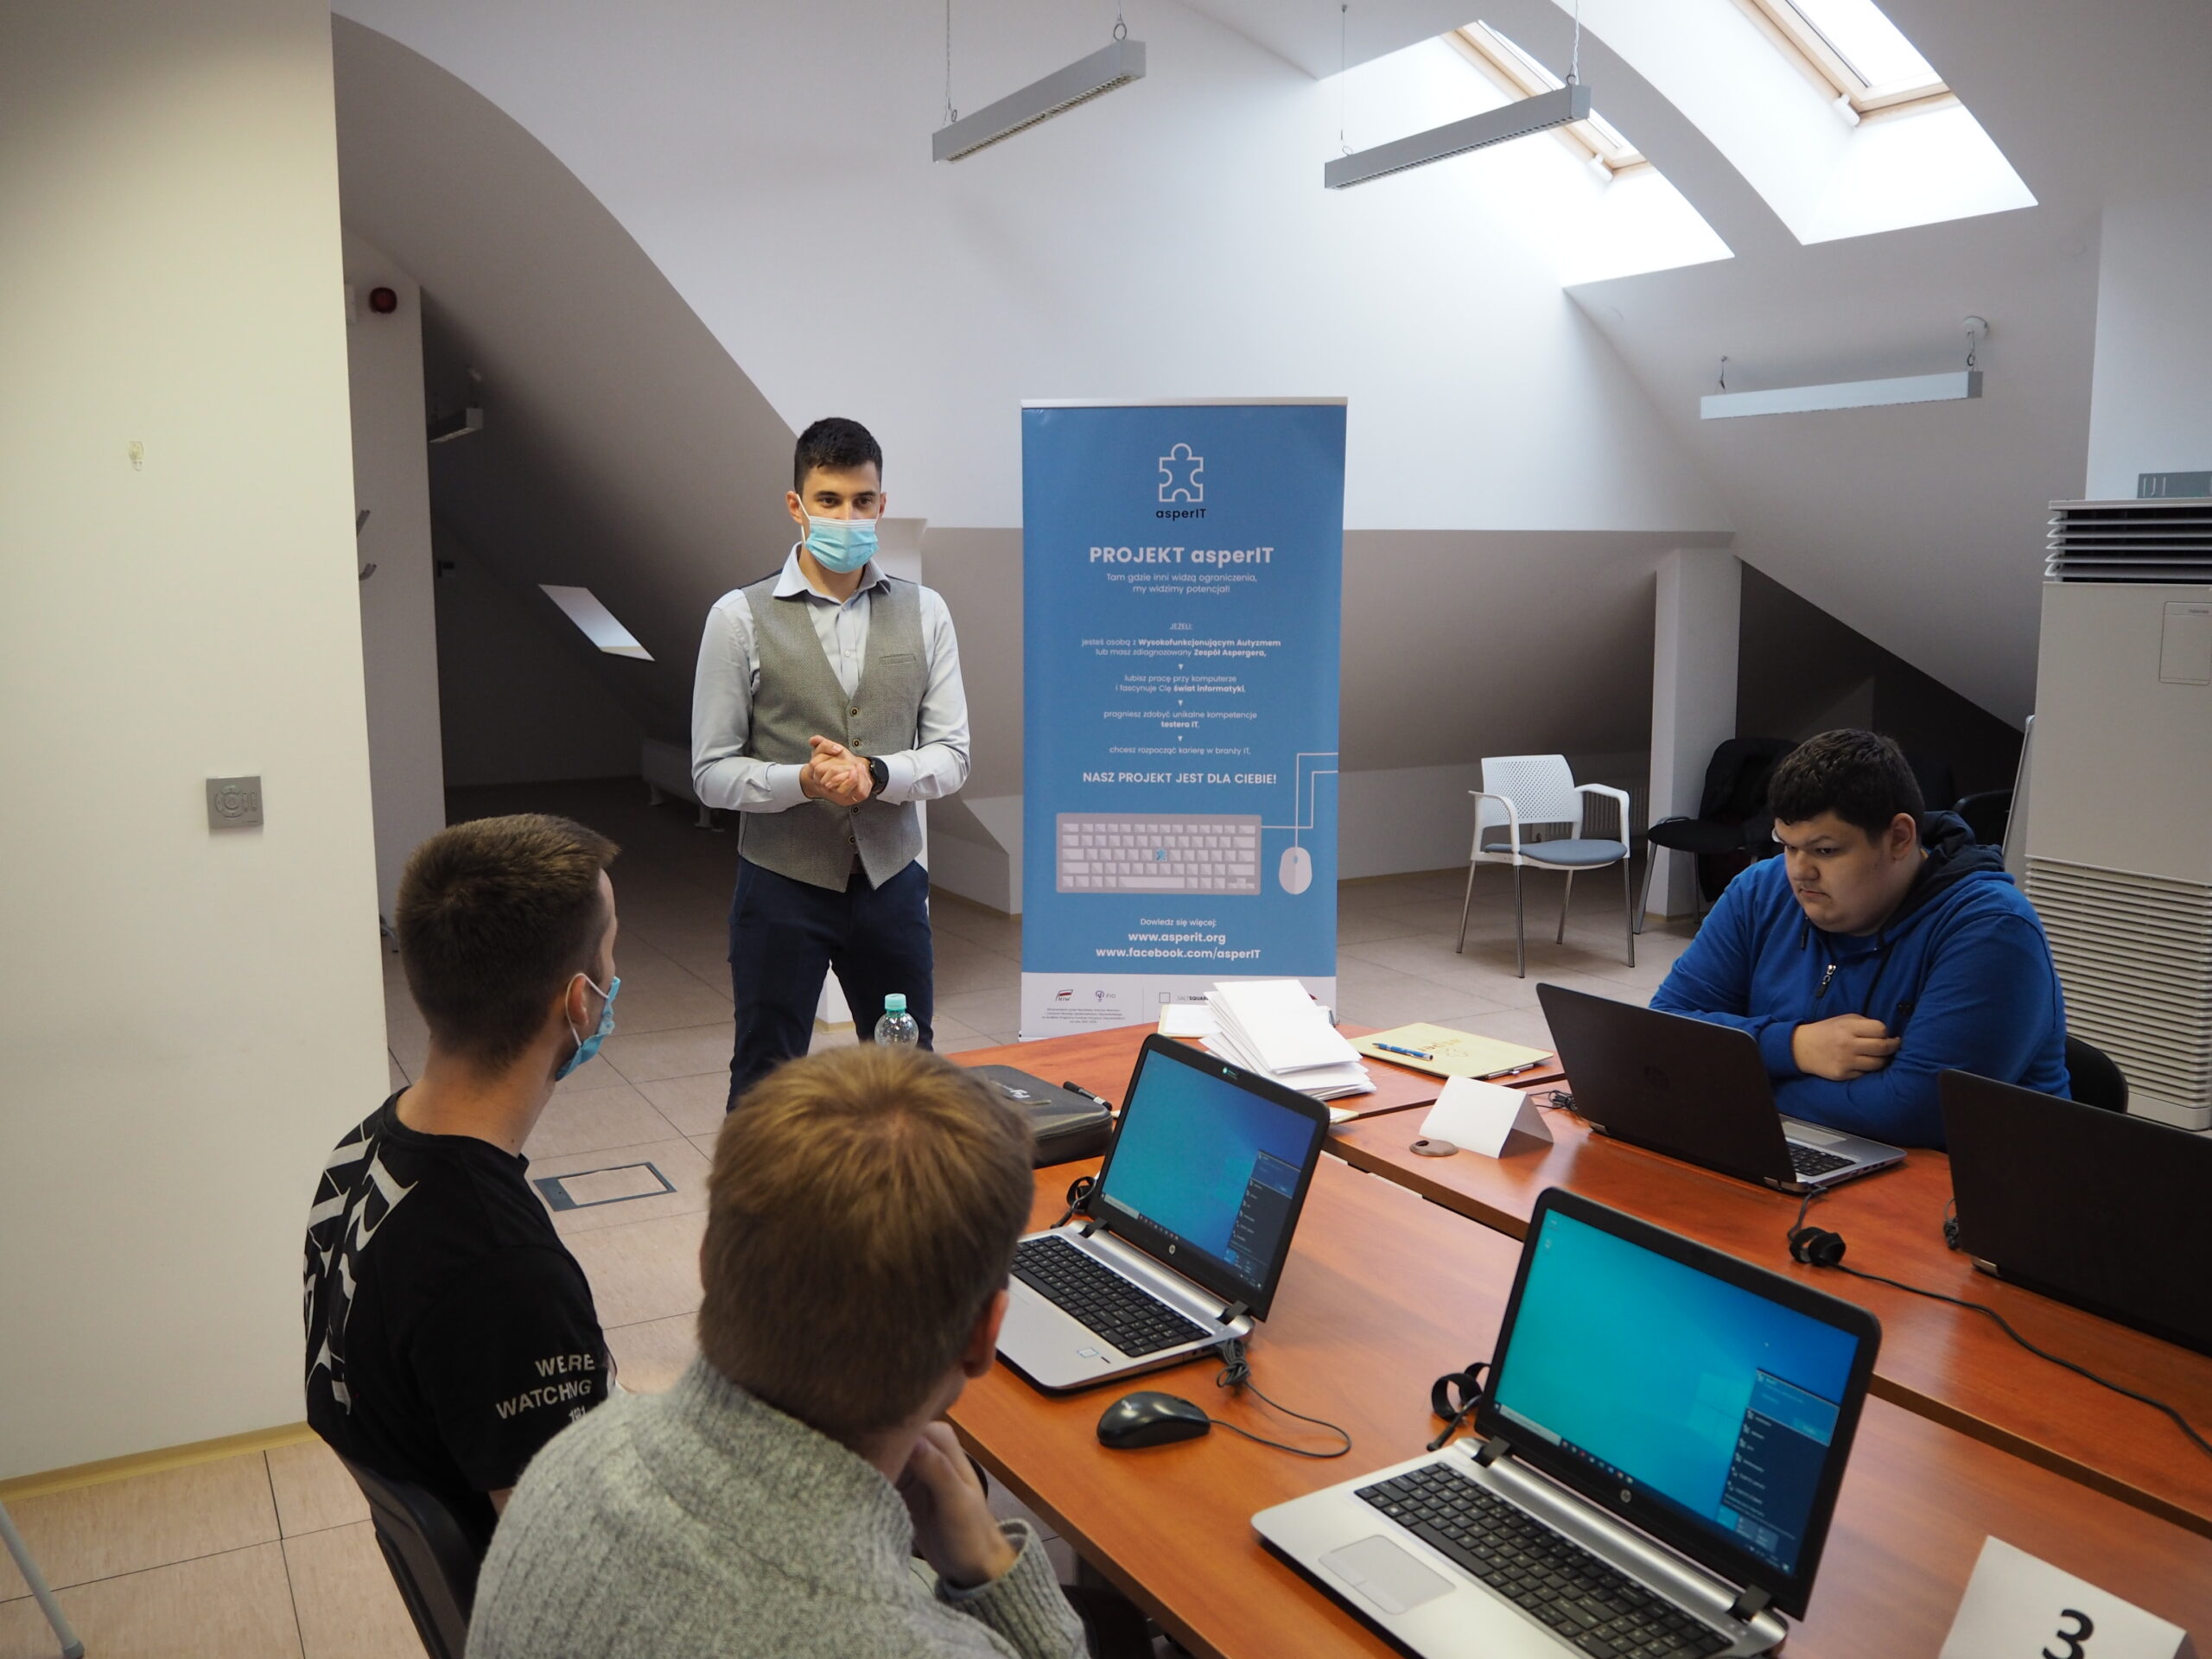 asperIT in Poznan completes the IT testing and recruitment process.